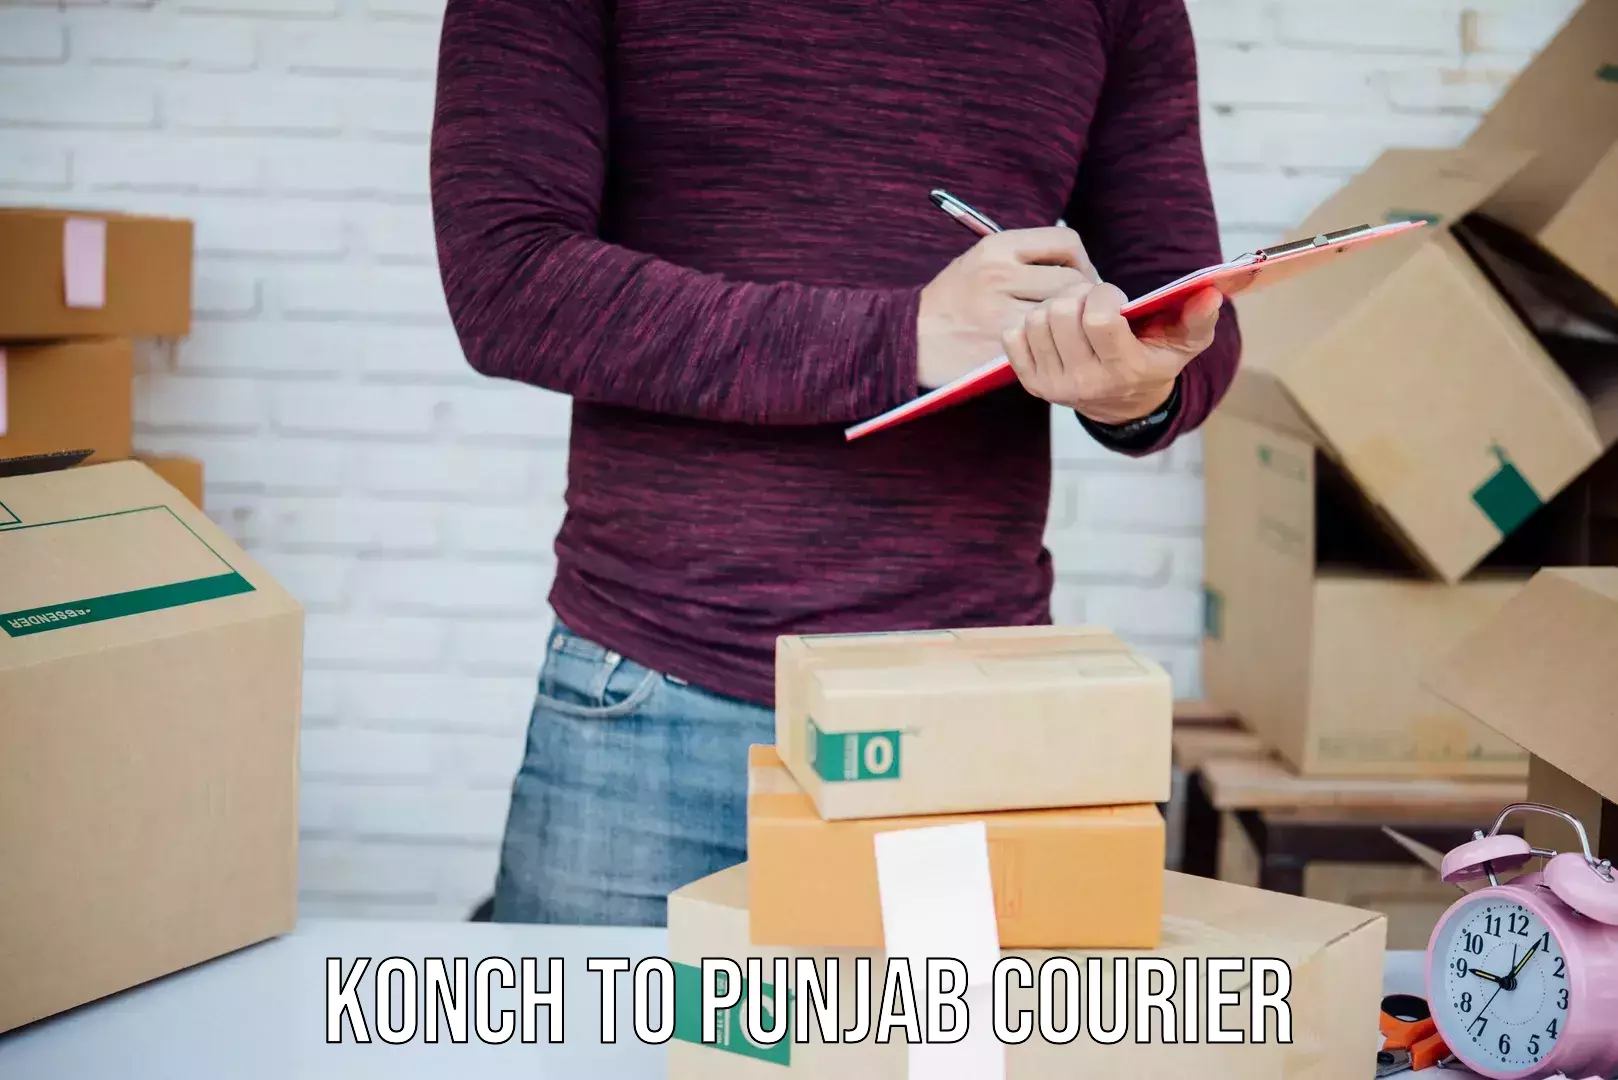 Enhanced tracking features Konch to Punjab